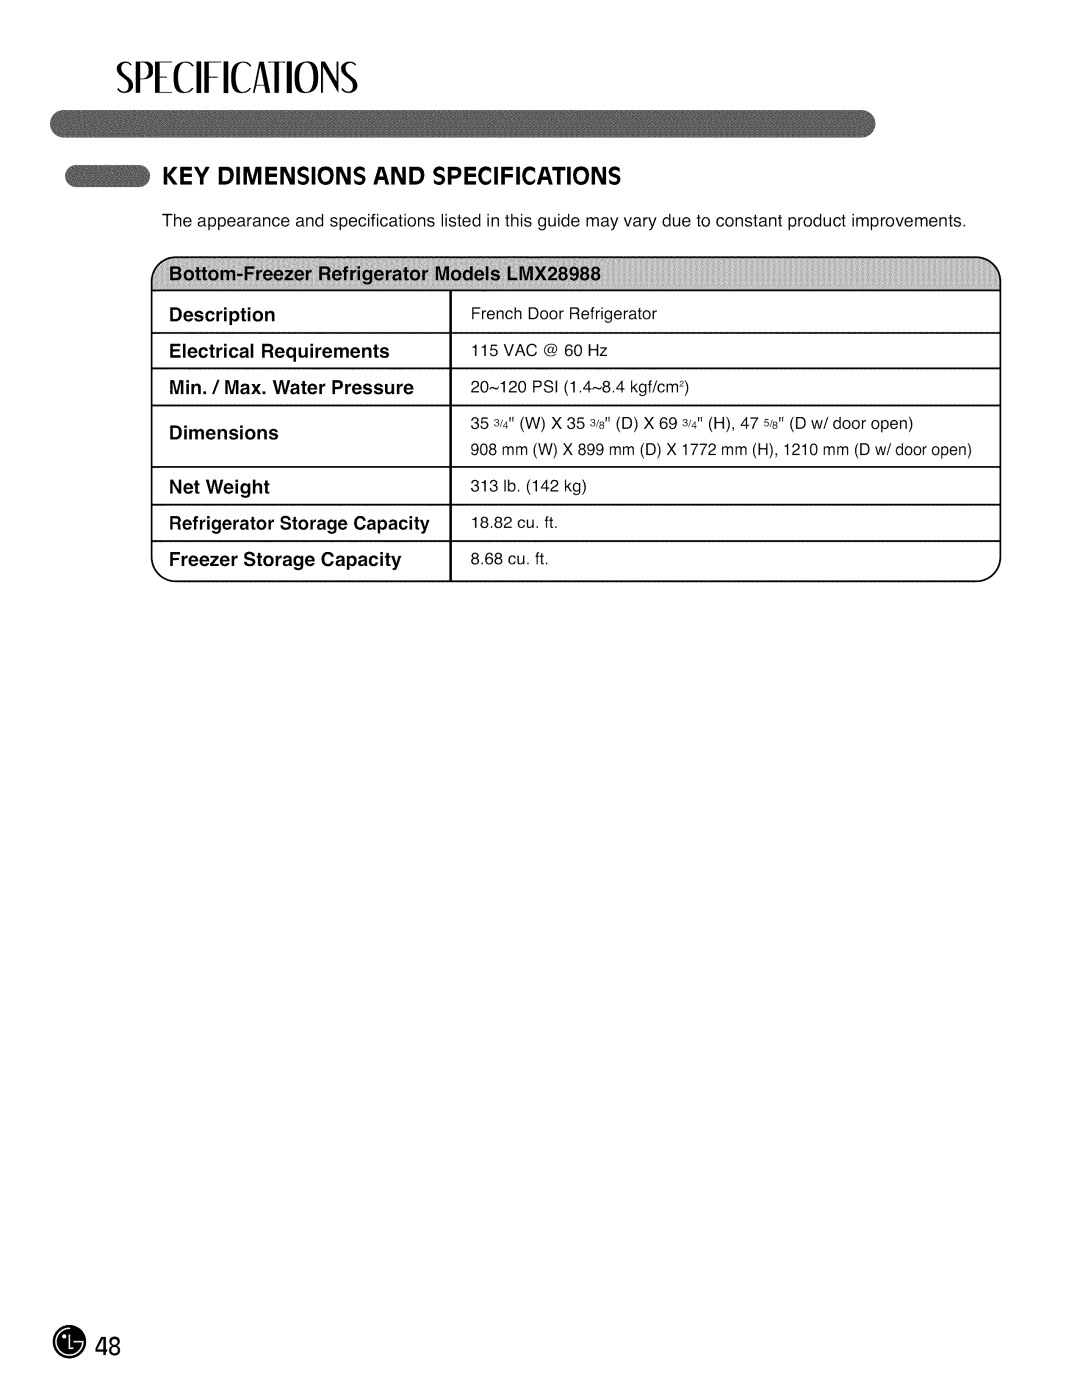 LG Electronics LMX28988 manual Specificaiions, Key Dimensions And Specifications 